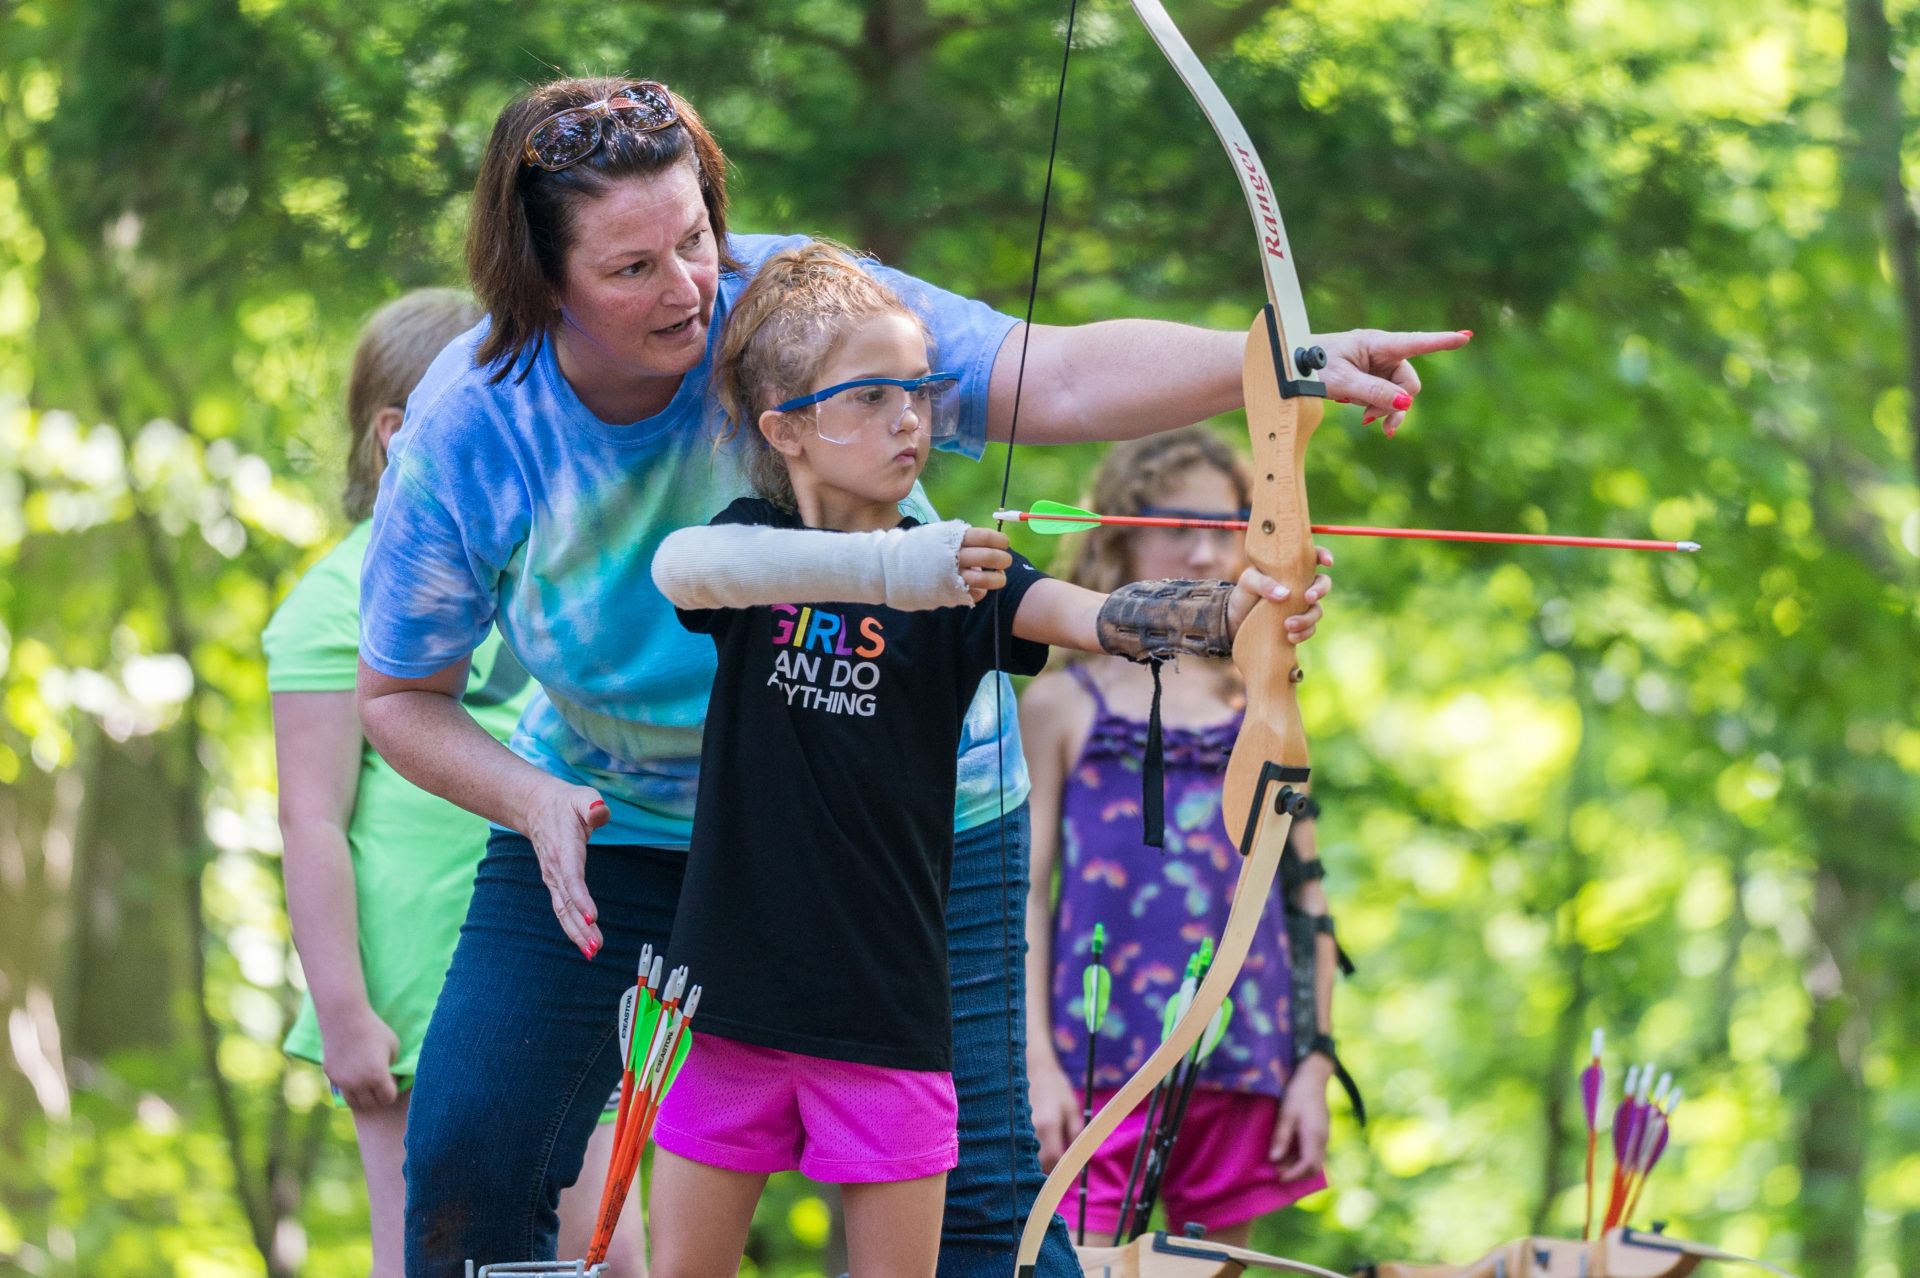 training showing a young girl how to do archery